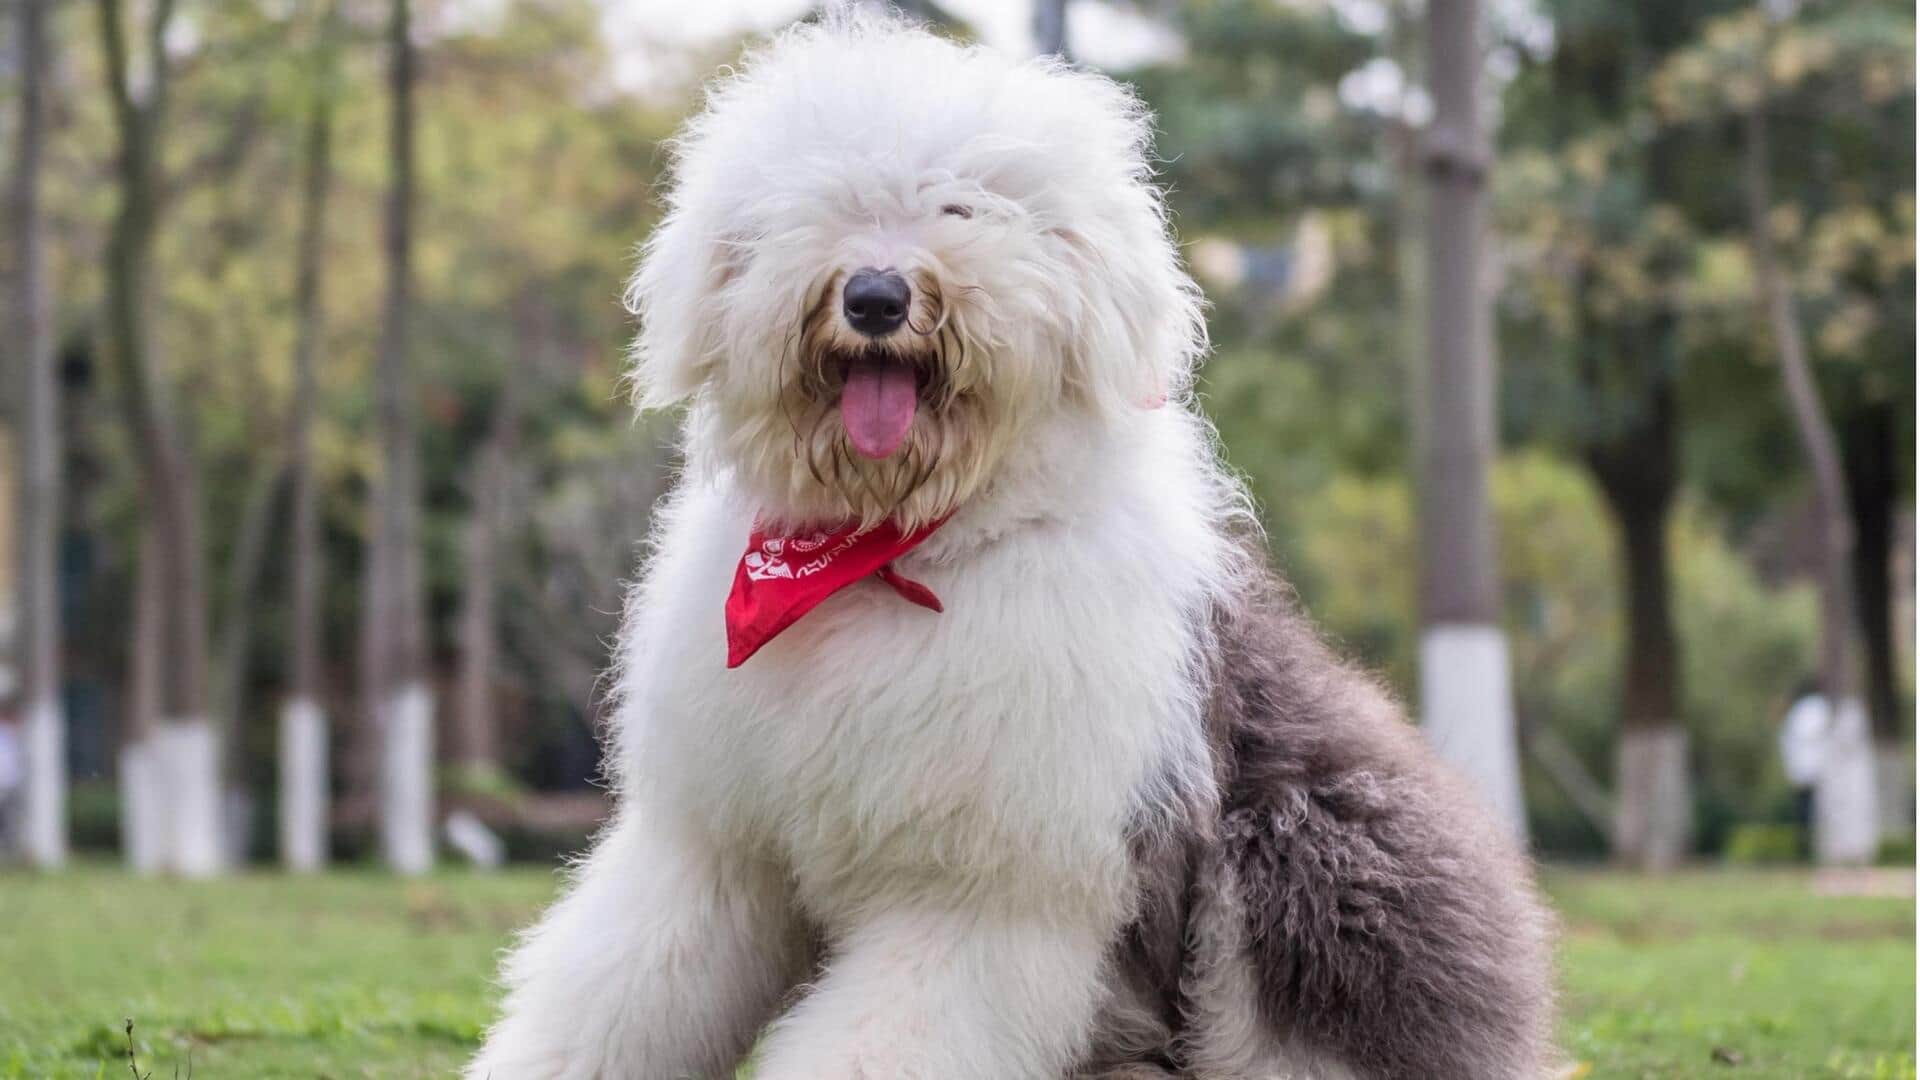 Care tips for your Old English Sheepdog